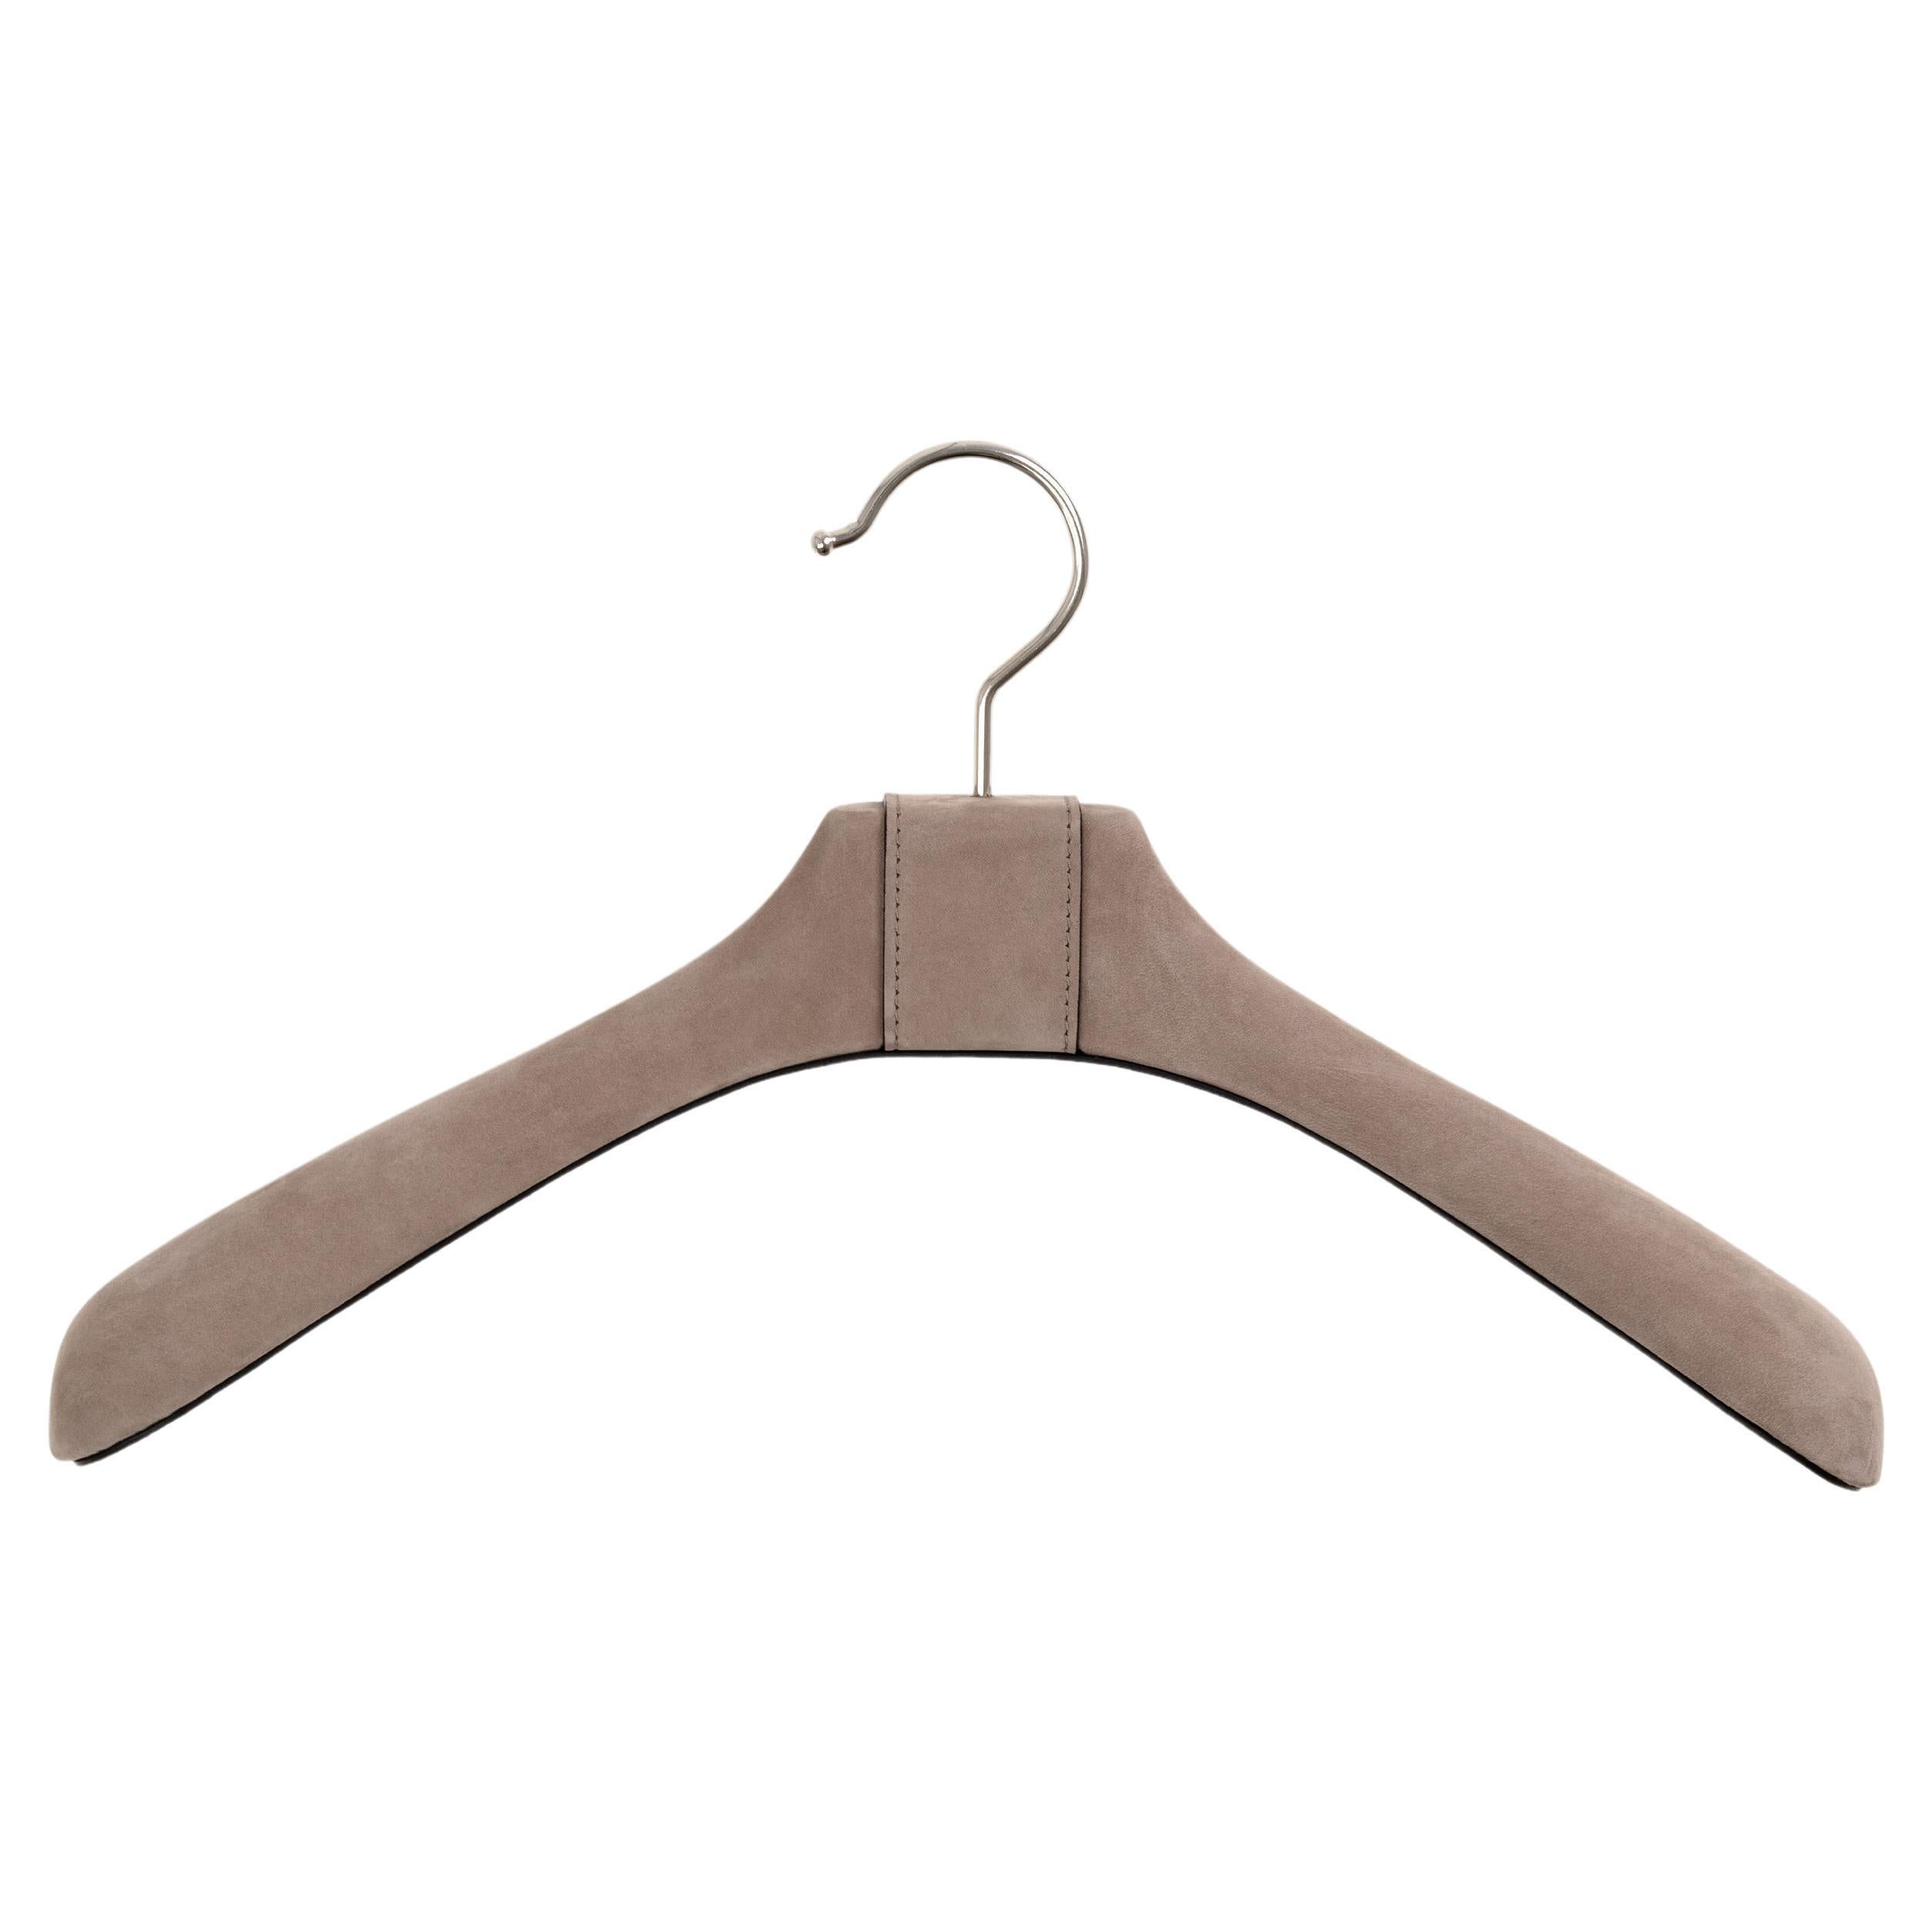 21st Century Coat Hanger Full Covered in Real Leather Handcrafted in Italy For Sale